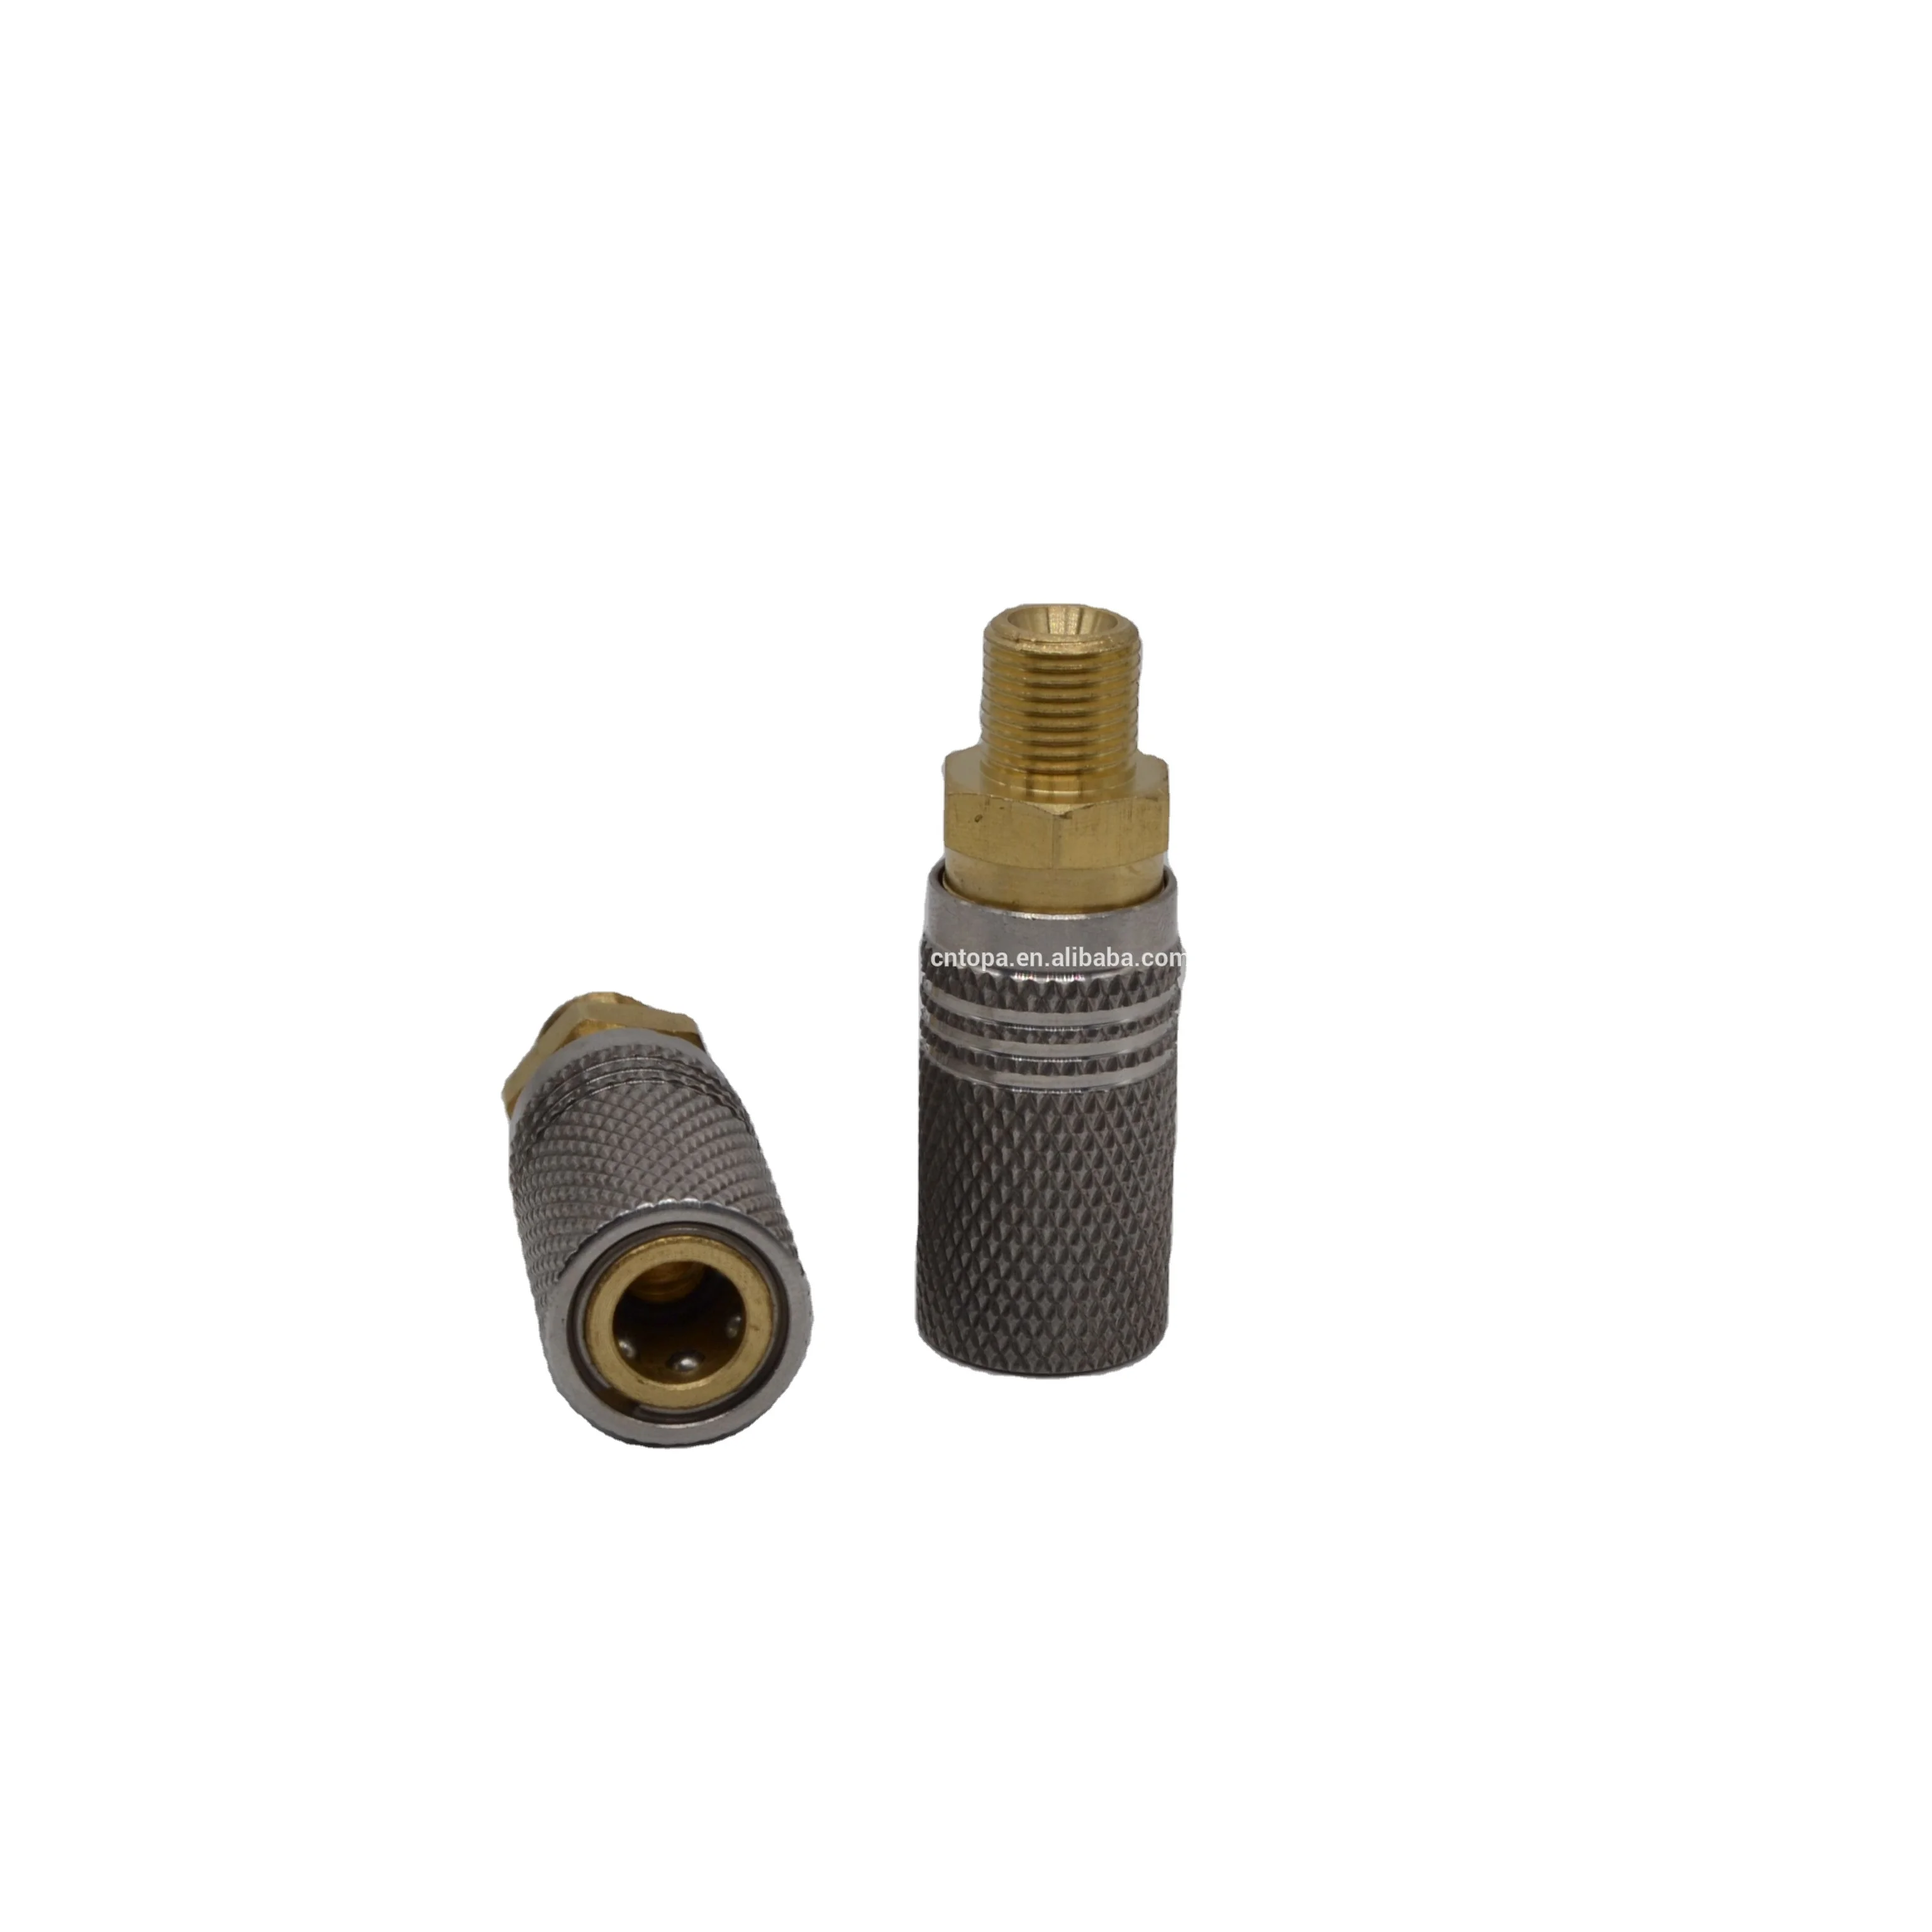 

Female quick fill adapter pcp air rifle parts high pressure 1/8 bsp npt with lengthen 8mm quick fill coupler, Yellow or silver